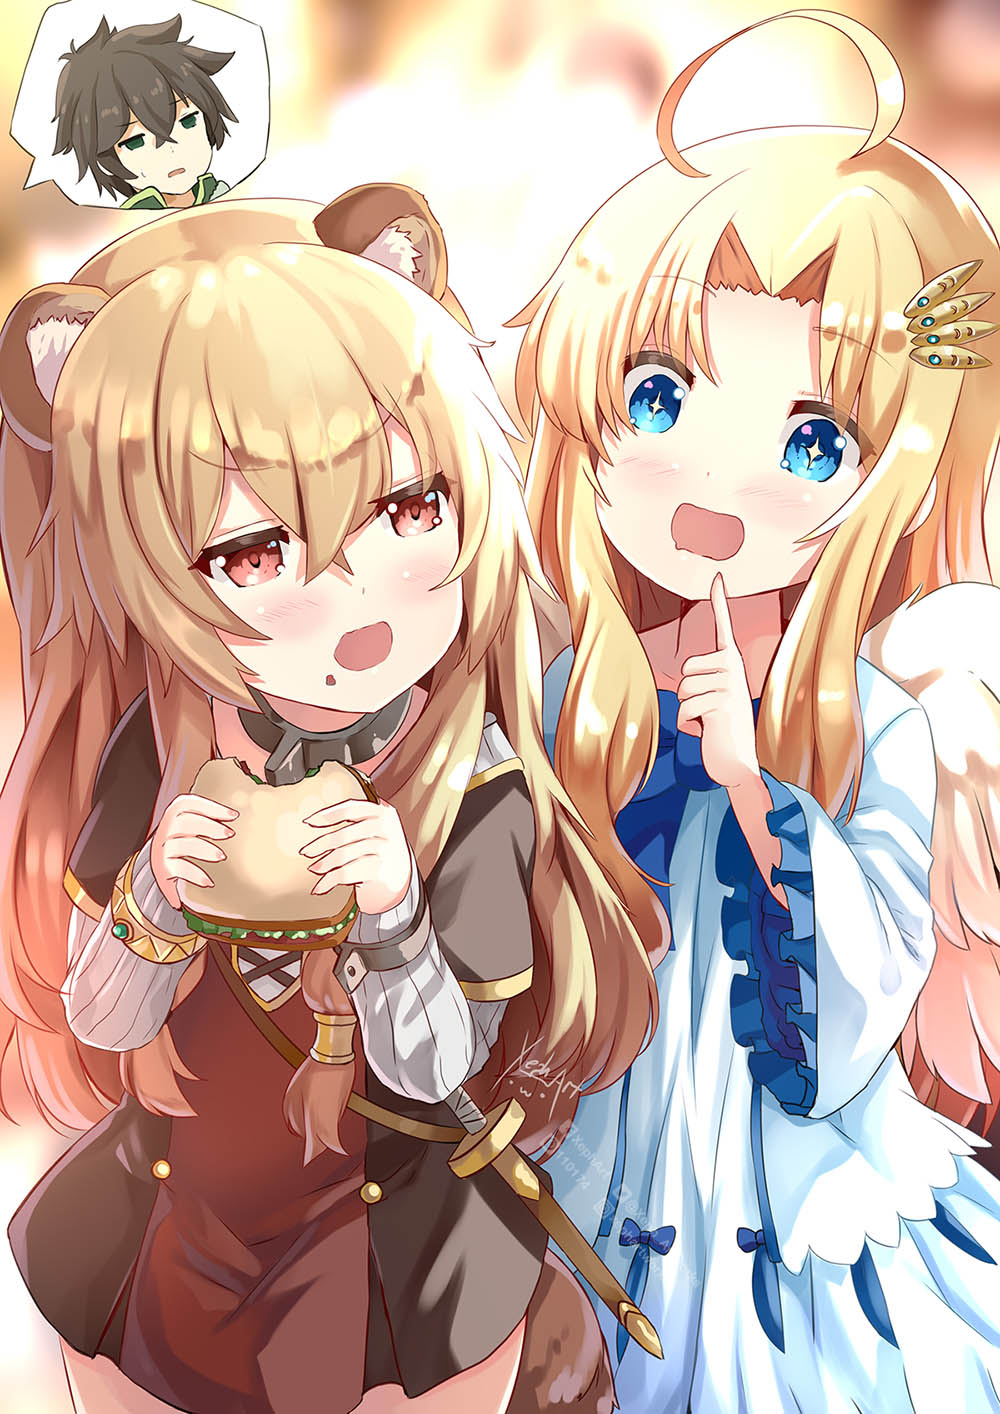 1boy 2girls :d ahoge angel_wings animal_ear_fluff animal_ears bangs blonde_hair blue_bow blue_eyes blurry blurry_background bow brown_capelet brown_dress brown_hair capelet collarbone commentary depth_of_field dress drooling eyebrows_visible_through_hair feathered_wings fingernails firo_(tate_no_yuusha_no_nariagari) food food_on_face green_eyes grey_shirt hair_between_eyes hair_ornament hand_up highres holding holding_food index_finger_raised iwatani_naofumi long_hair long_sleeves mouth_drool multiple_girls open_mouth parted_bangs pixiv_id raccoon_ears raphtalia red_eyes ribbed_shirt sandwich shirt signature smile tate_no_yuusha_no_nariagari time_paradox twitter_username very_long_hair white_dress white_wings wide_sleeves wings xephonia